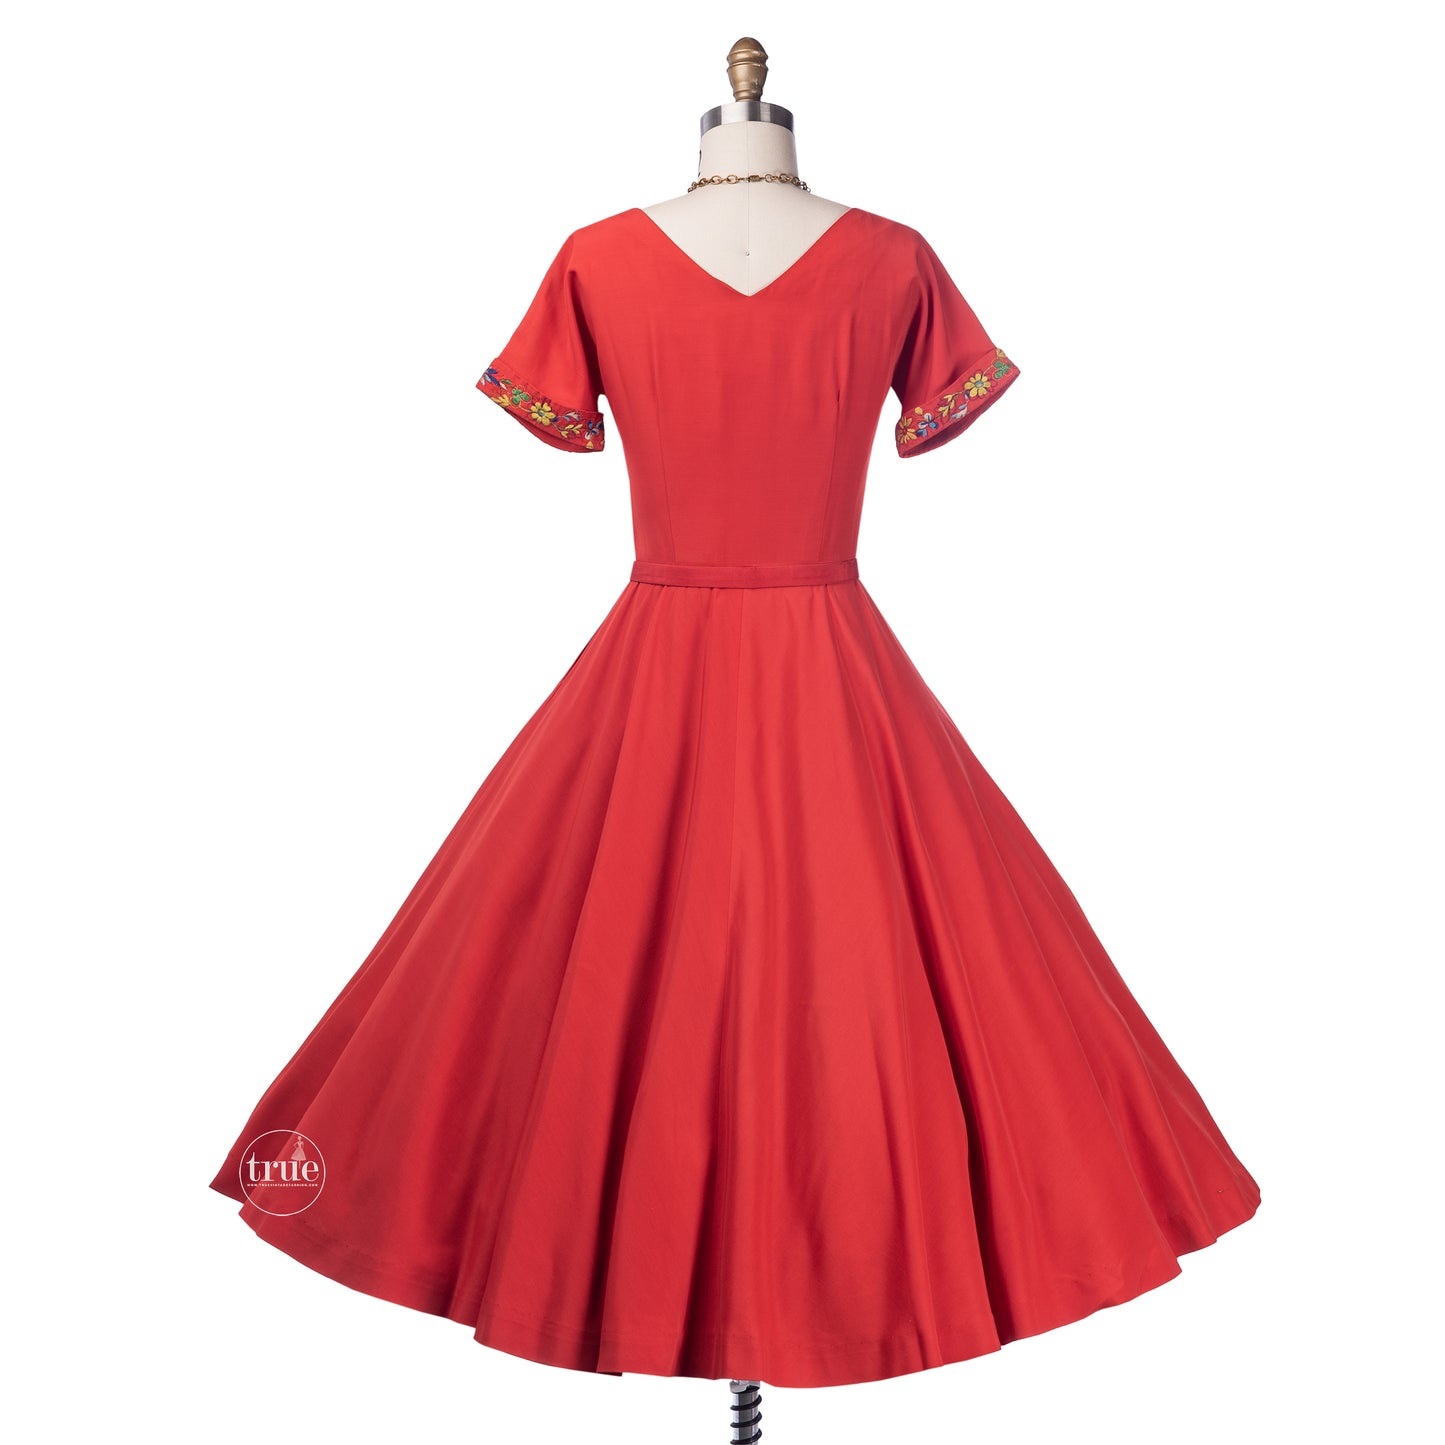 vintage 1950's dress ...pretty Teena Paige coral red embroidered full skirt dress